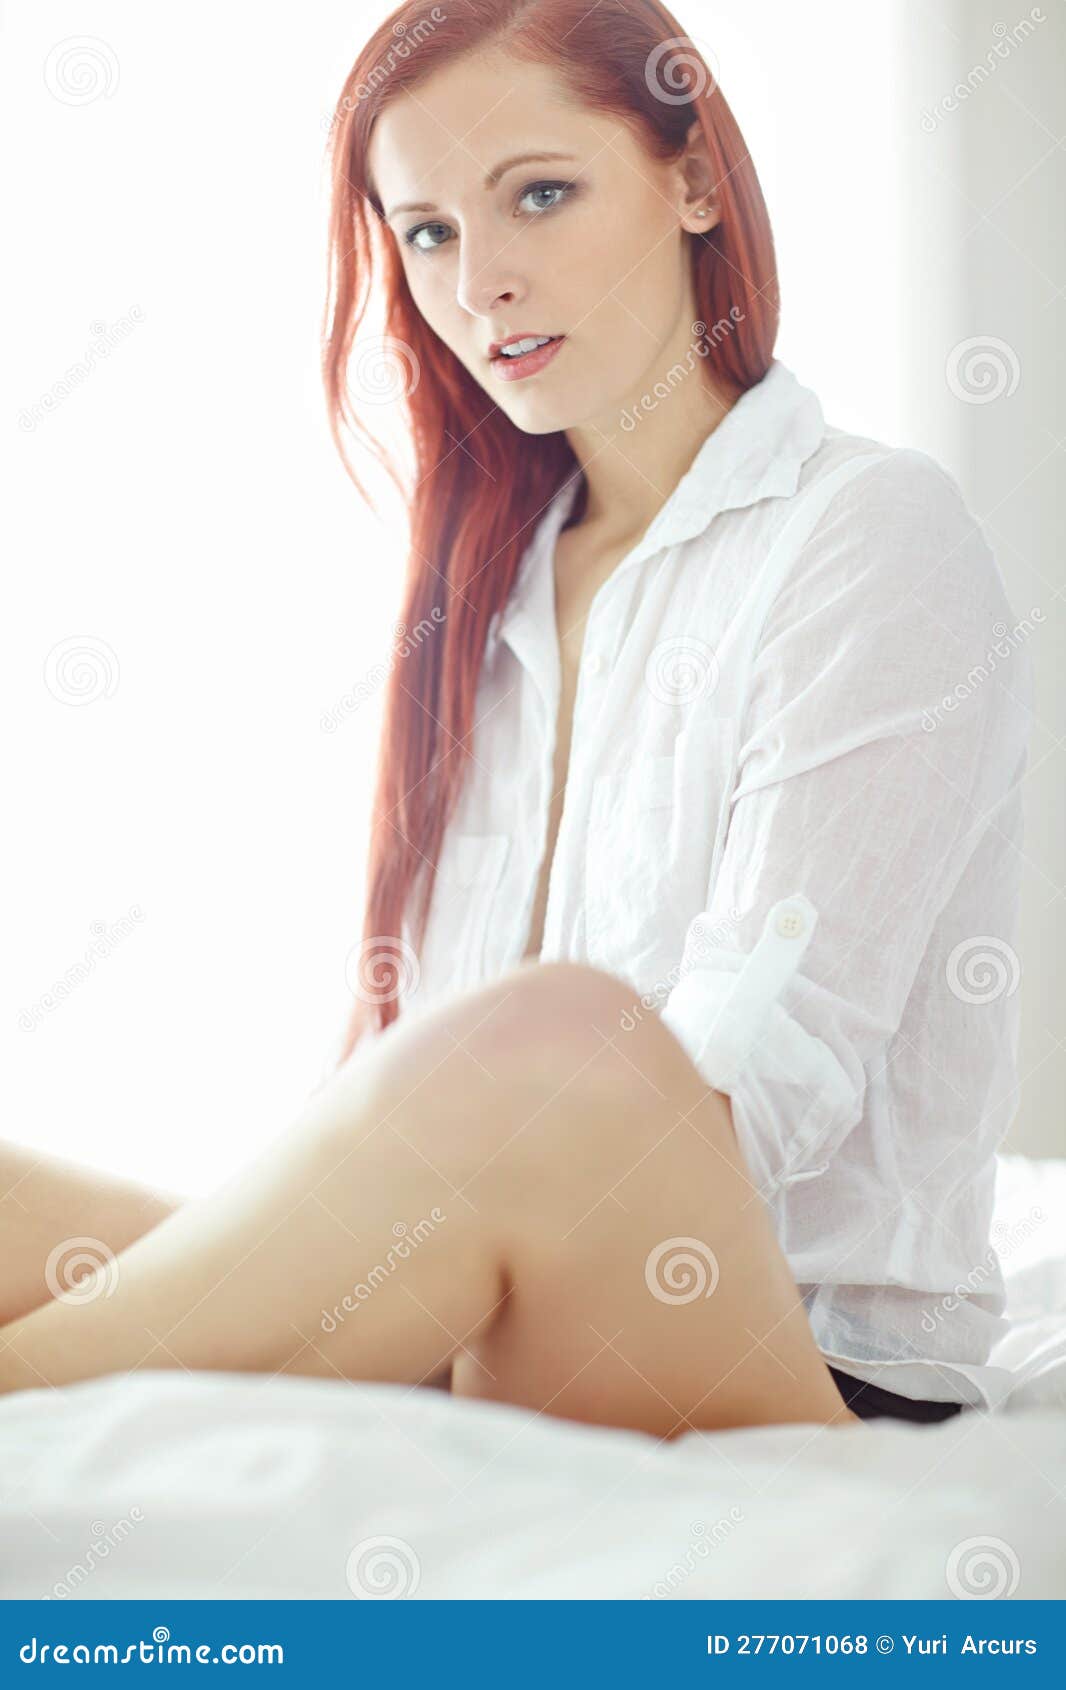 Portrait of One Beautiful Young Redhead Woman Relaxing on a Bed at